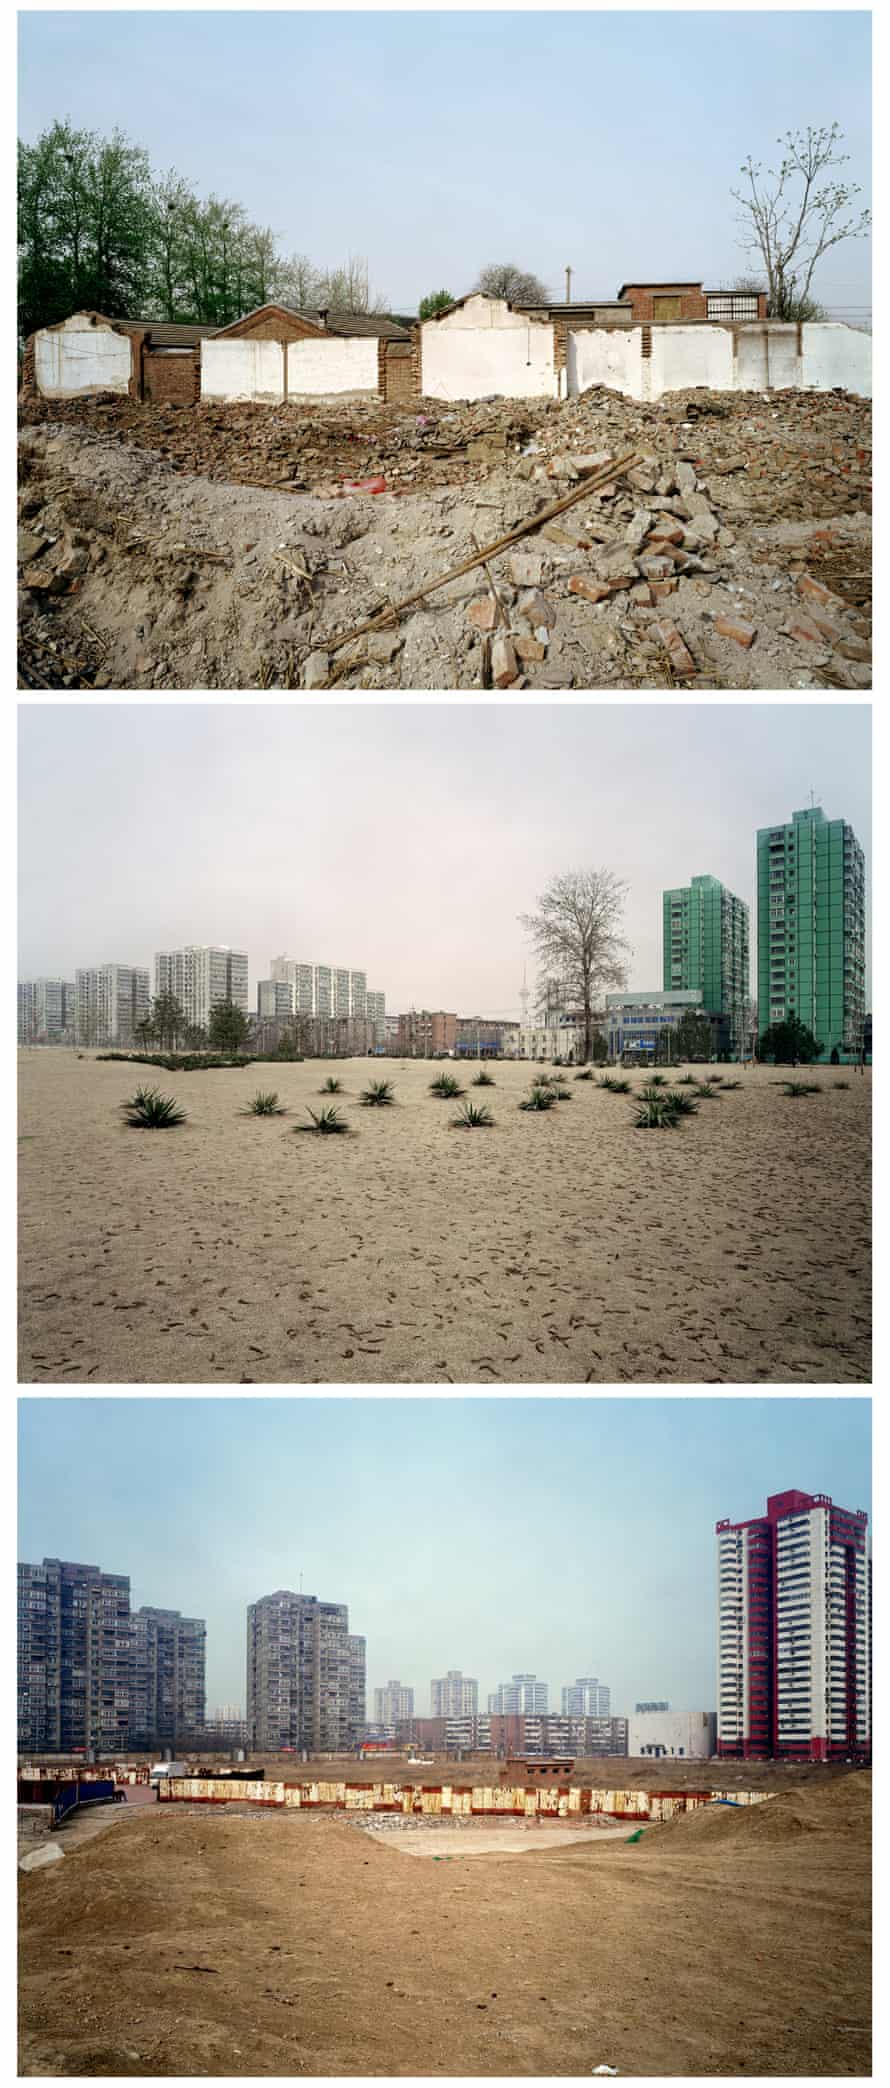 Images from Ai Weiwei’s Provisional Landscapes project